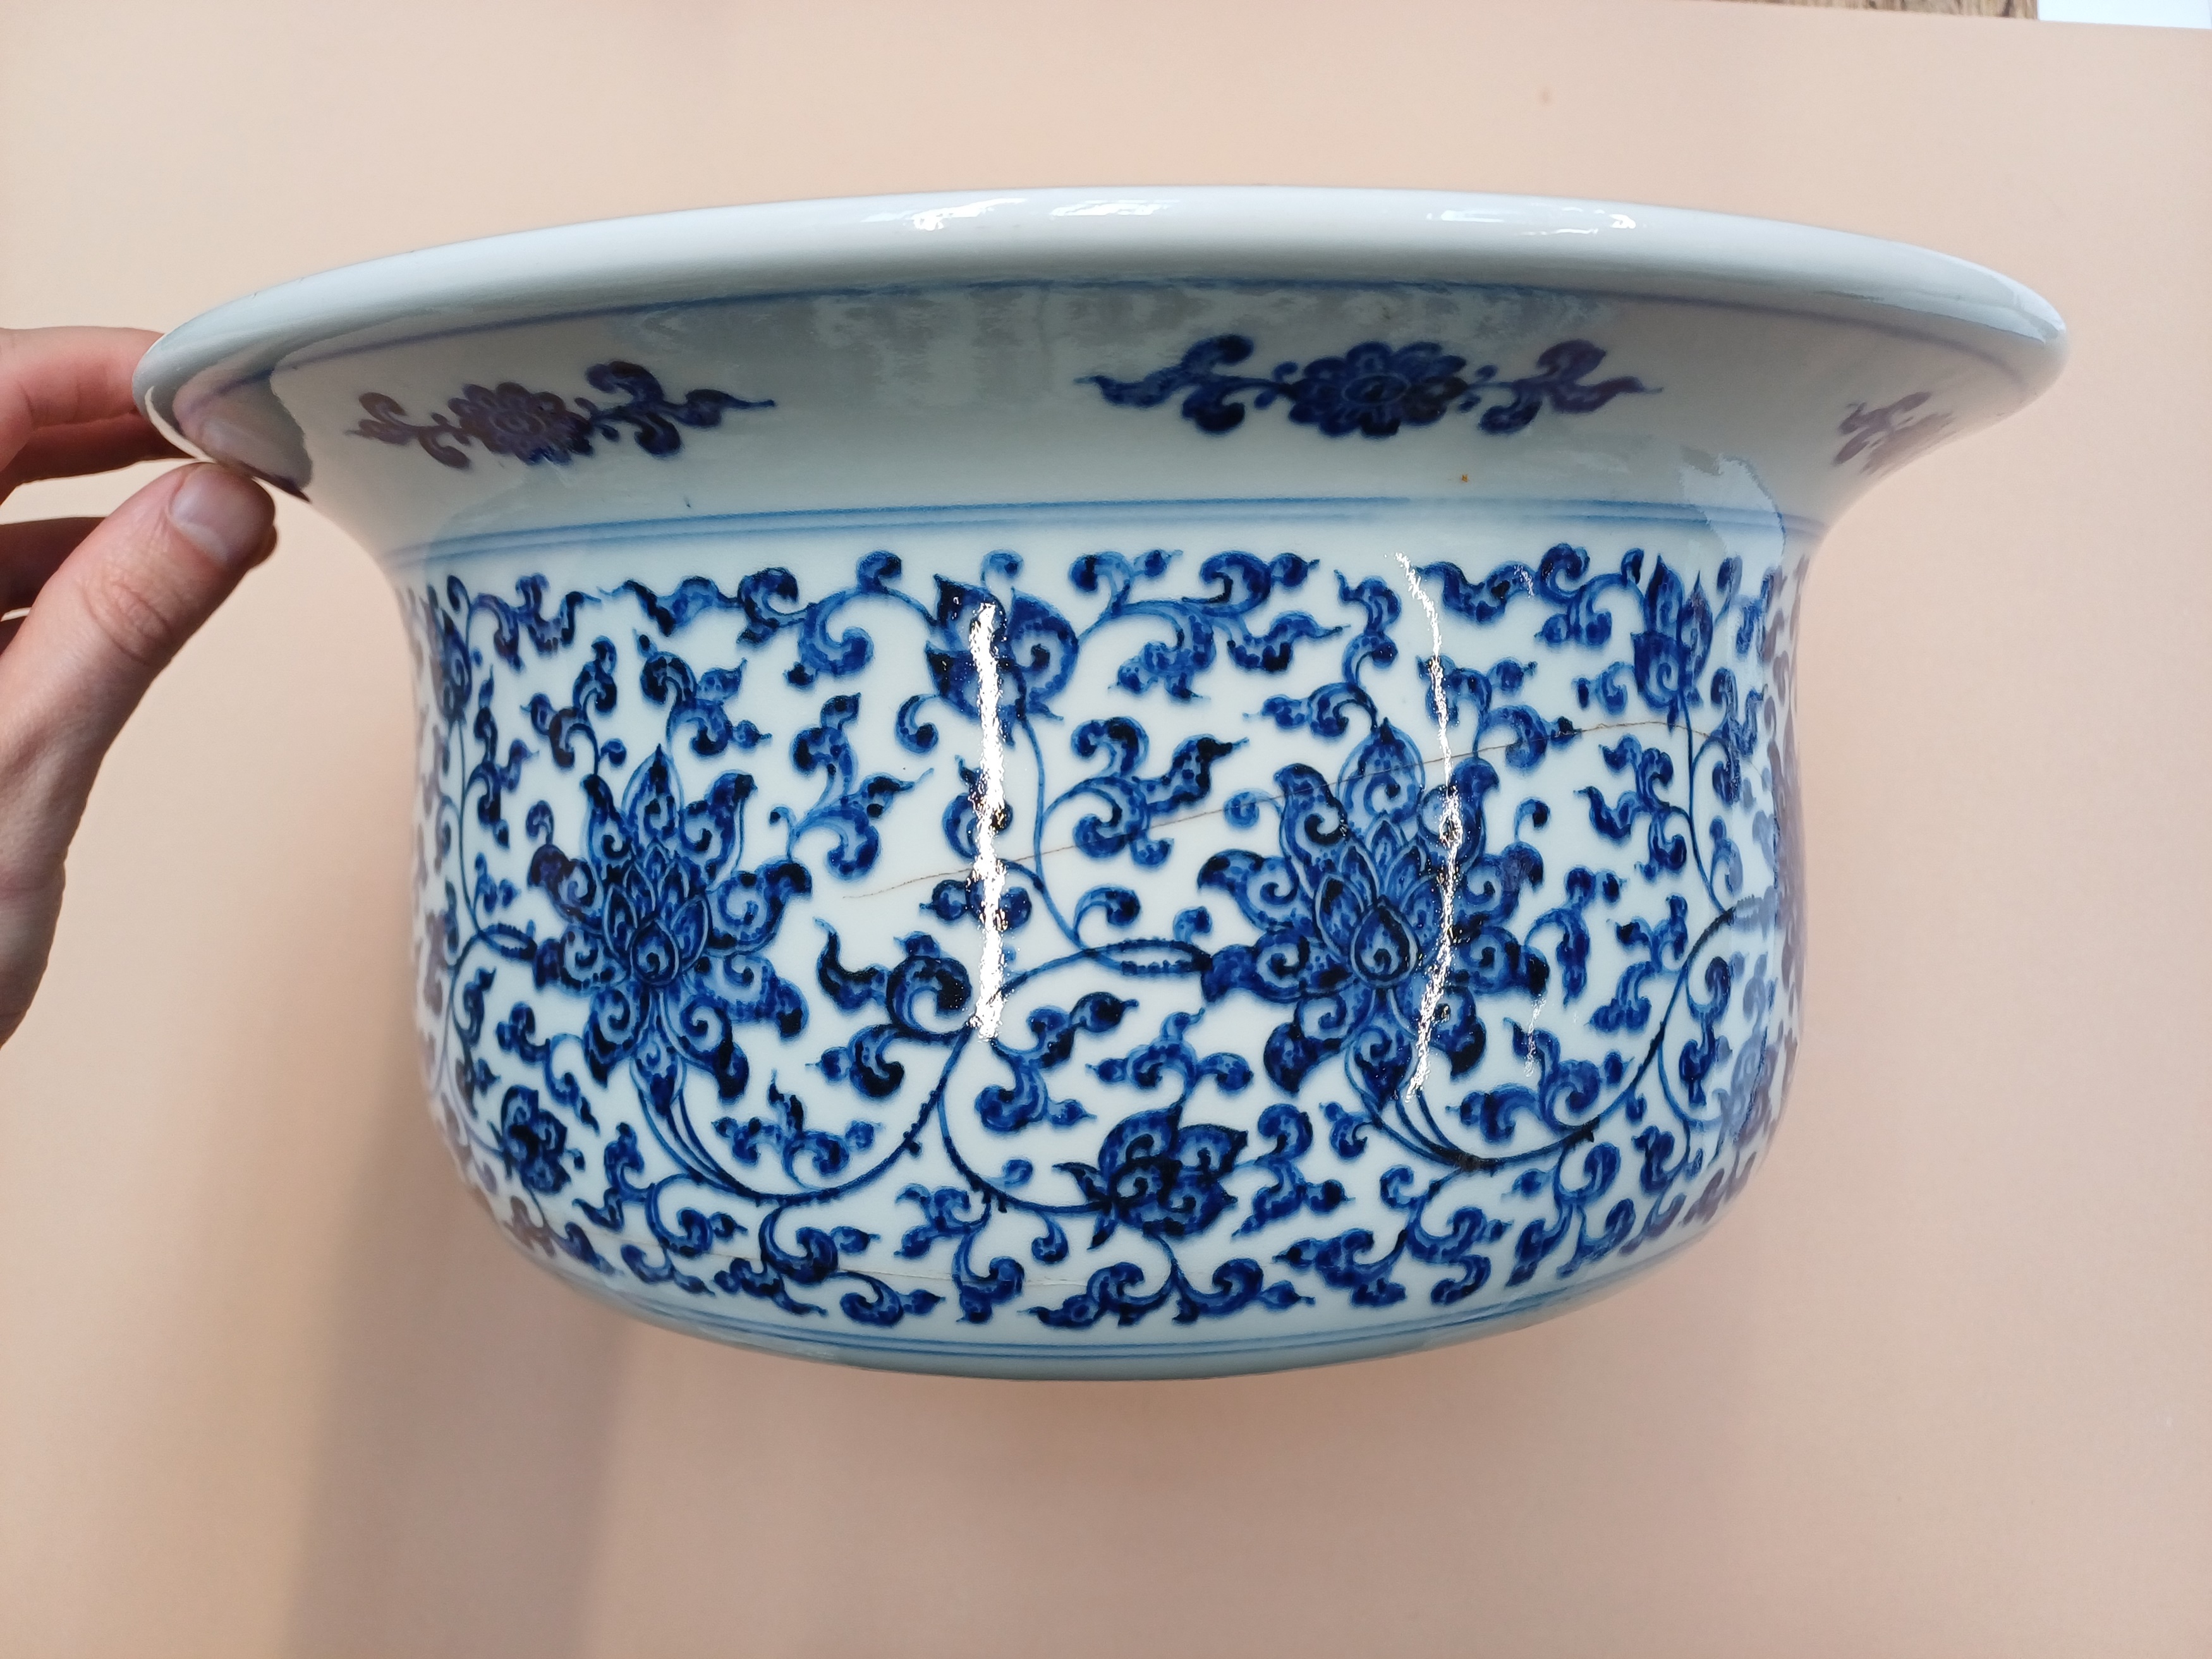 A CHINESE MING-STYLE BLUE AND WHITE 'LOTUS' BASIN 明式青花纏枝蓮紋盆 《大清雍正年製》款 - Image 7 of 14